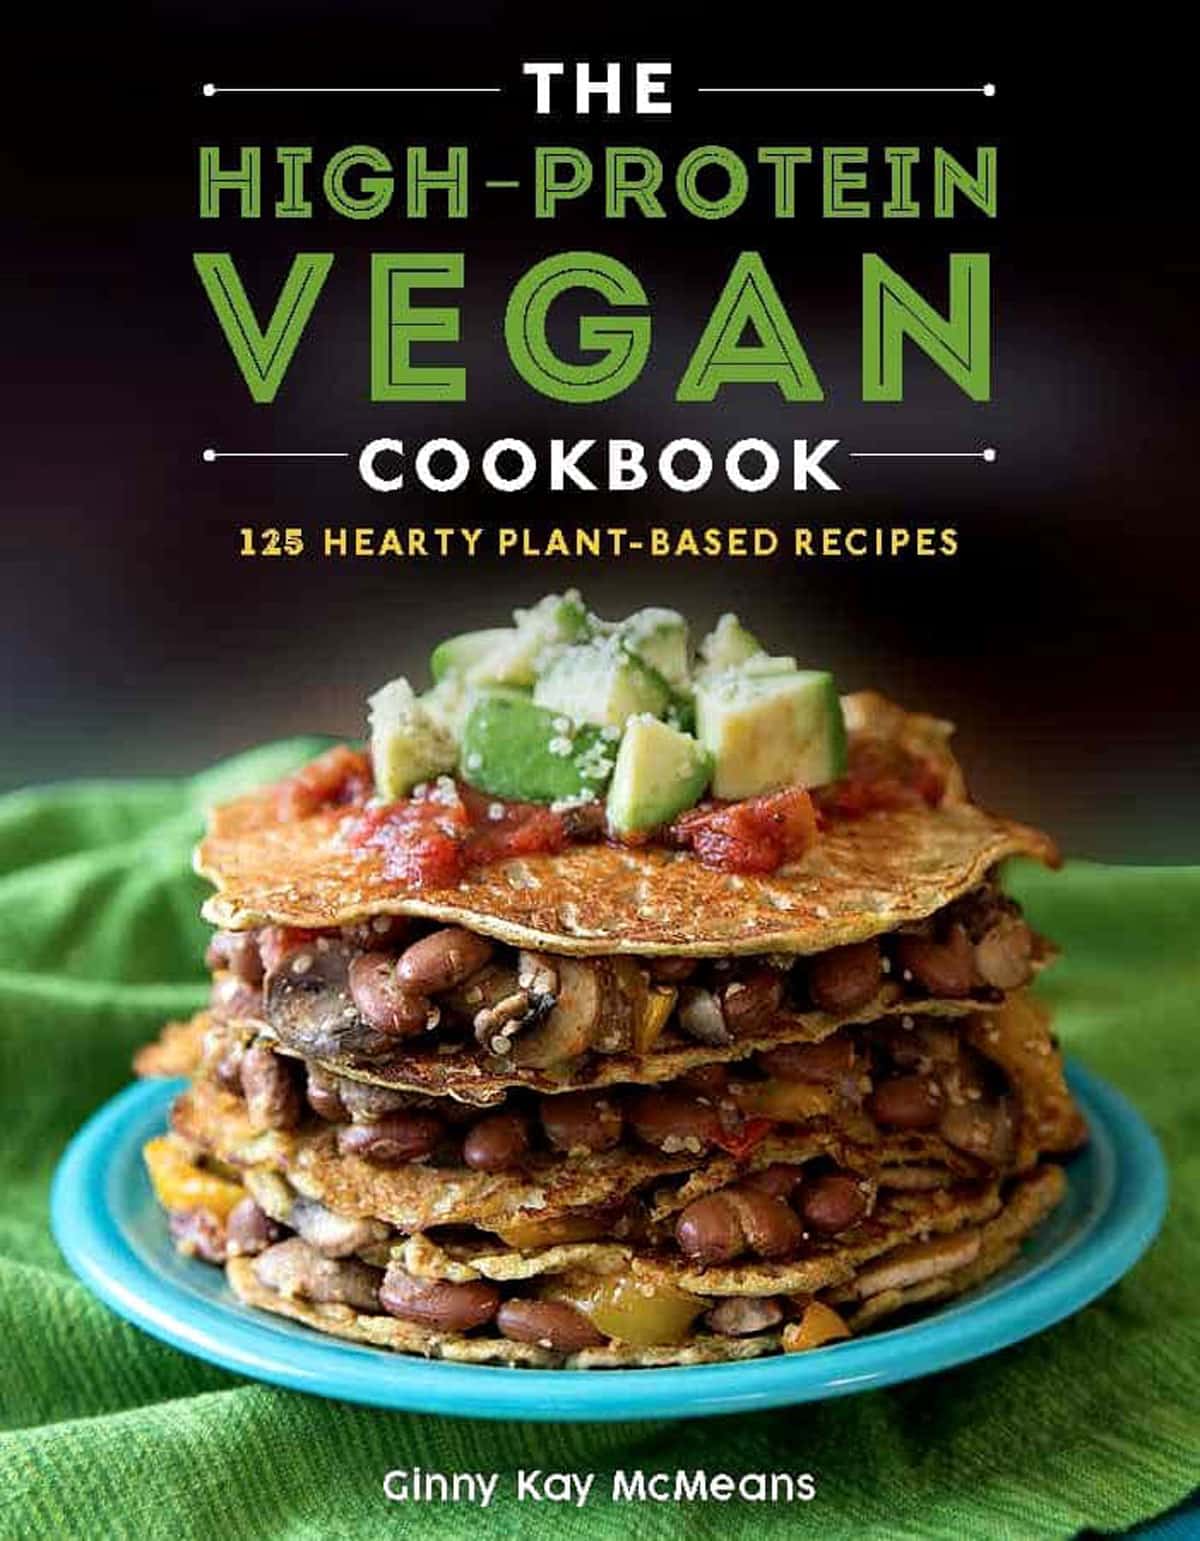 The High Protein Vegan Cookbook cover.